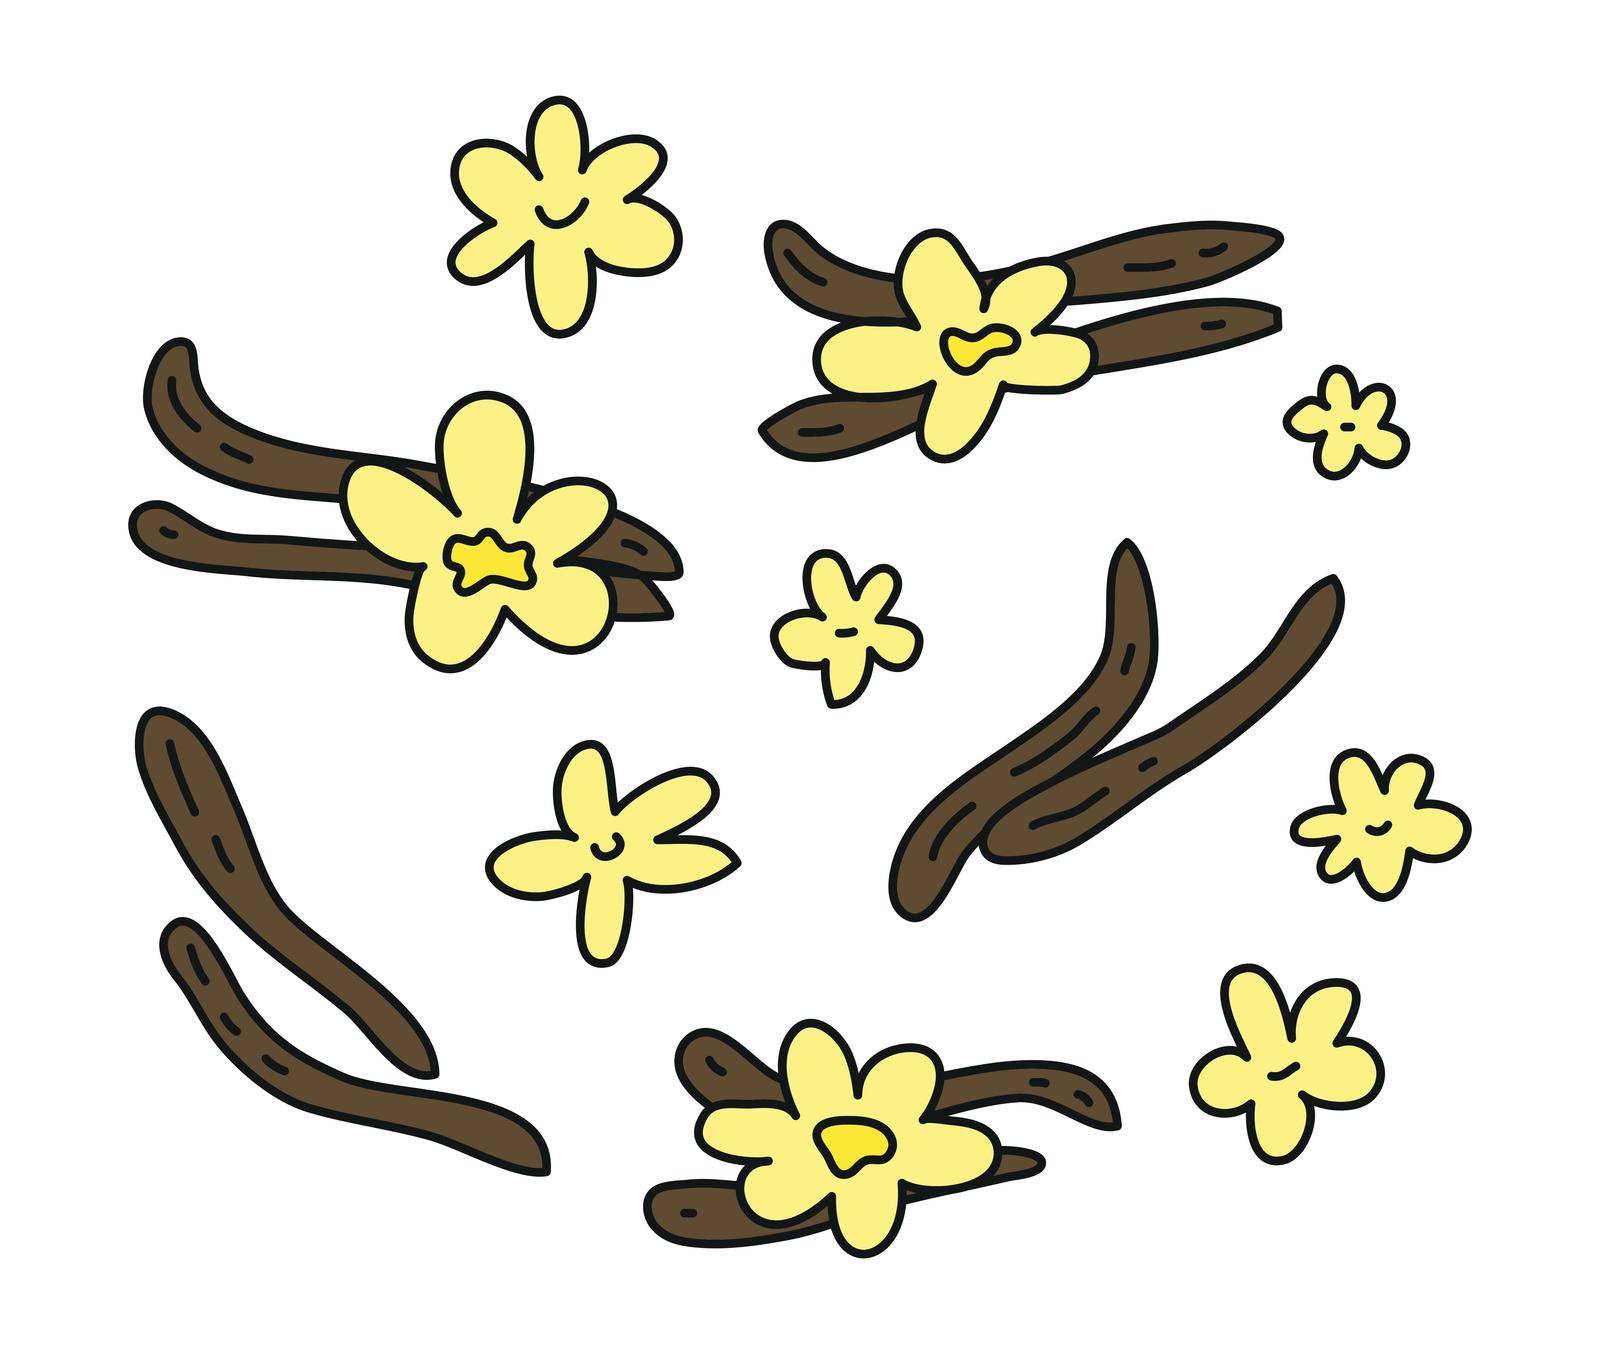 Set of doodle colored vanilla sticks and flowers isolated on white background.